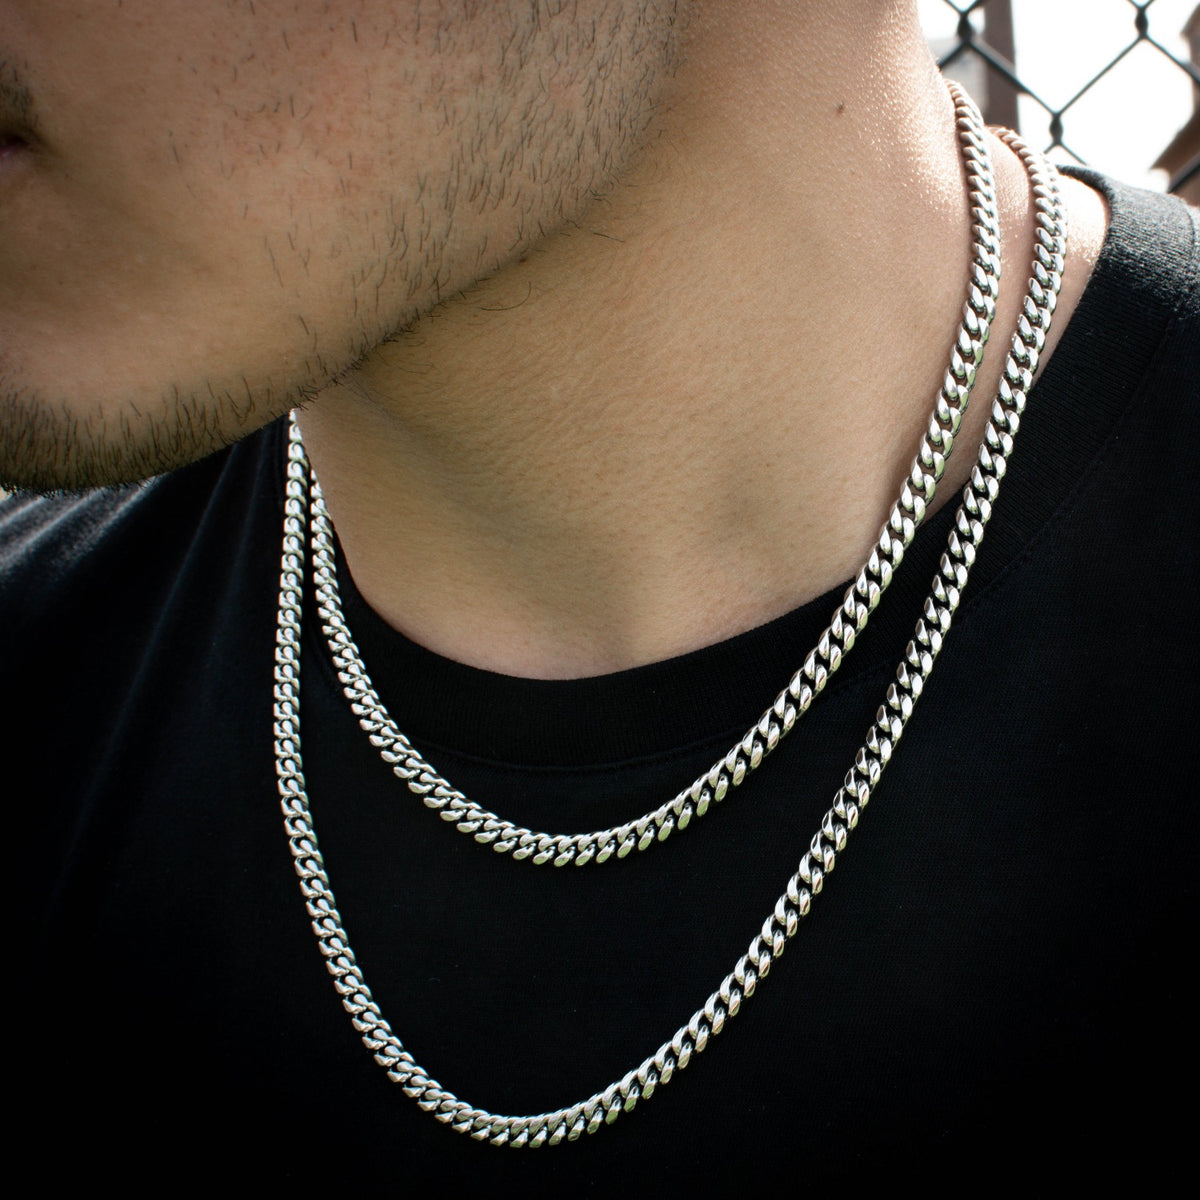 6mm Miami Cuban Link Chain in White Gold - The Jewelry Plug